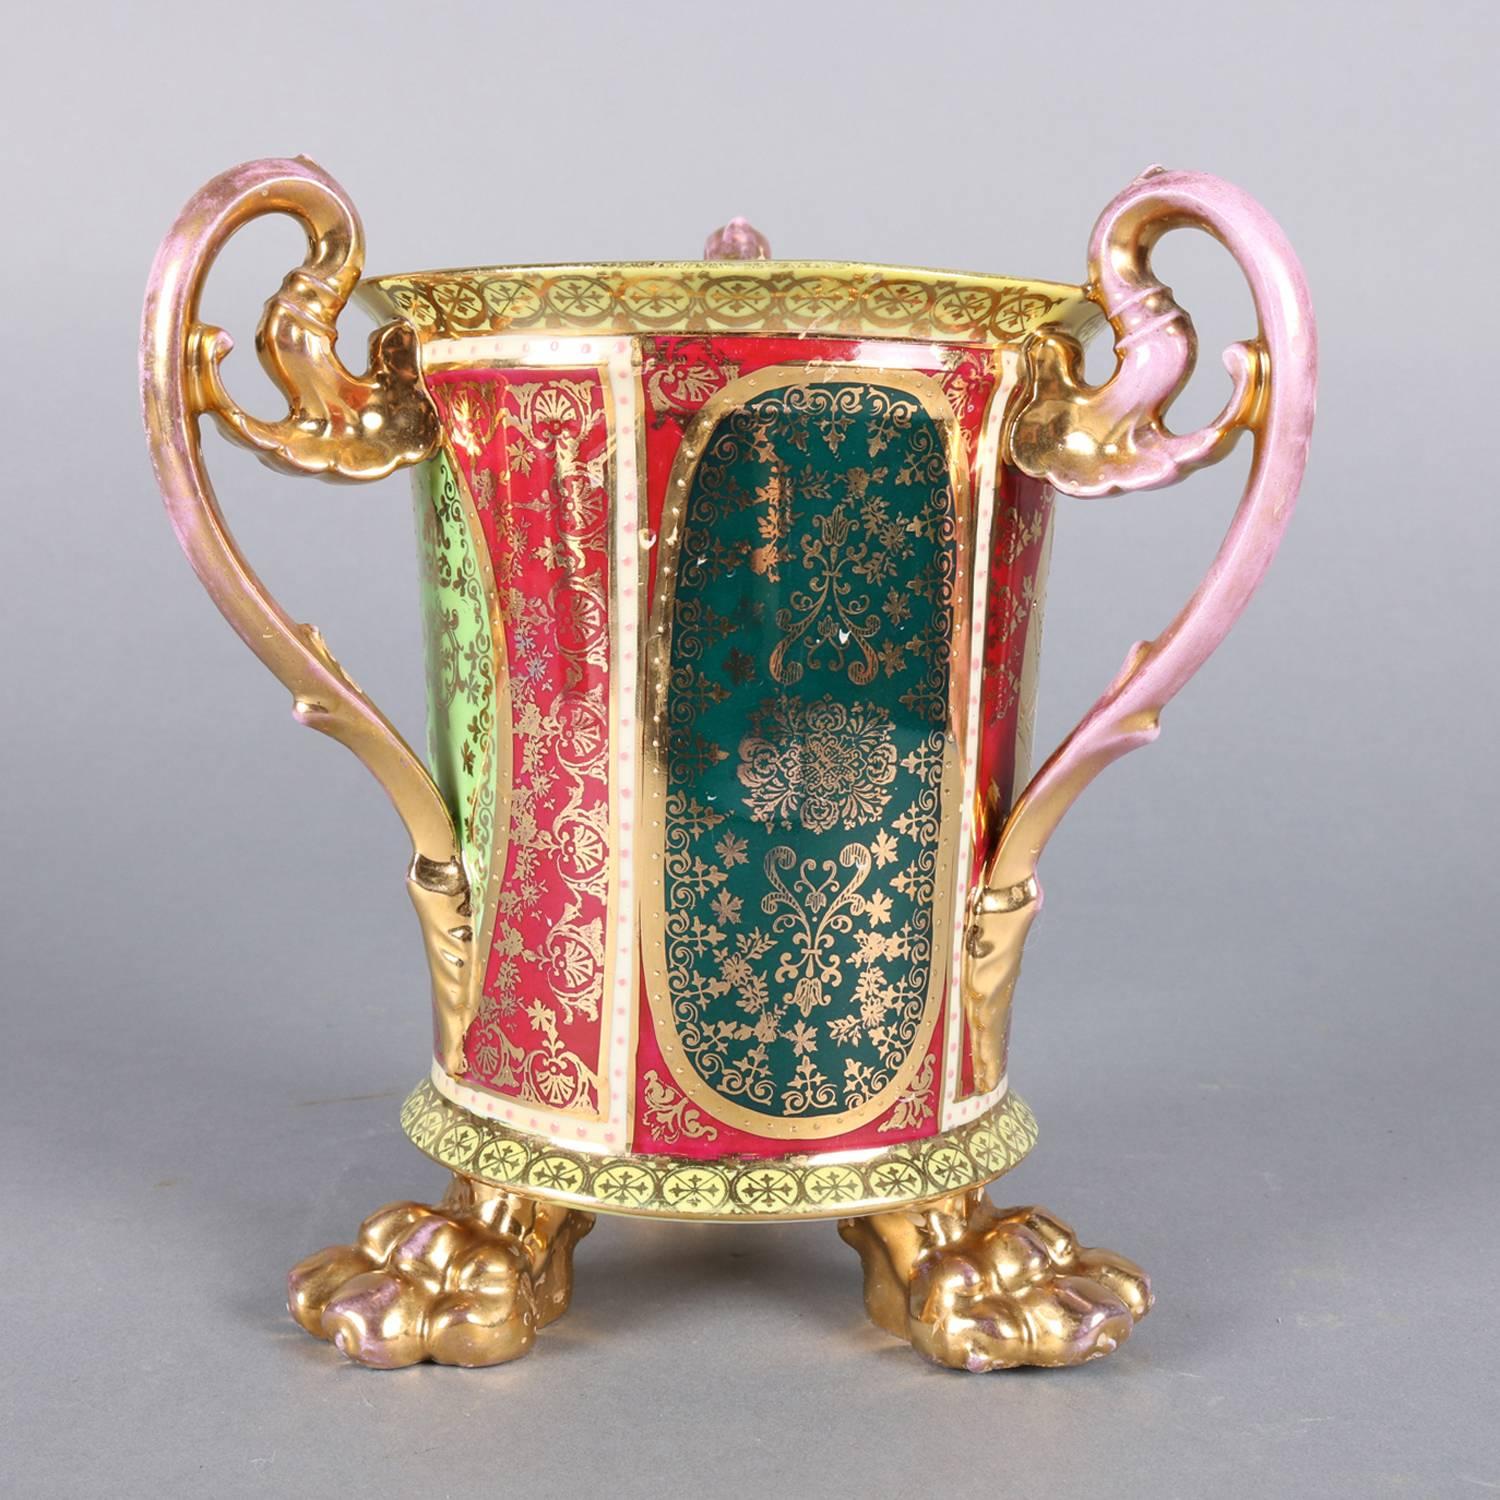 19th Century Austrian Royal Vienna Hand-Painted and Gilt 3-Handled Loving Cup, circa 1890